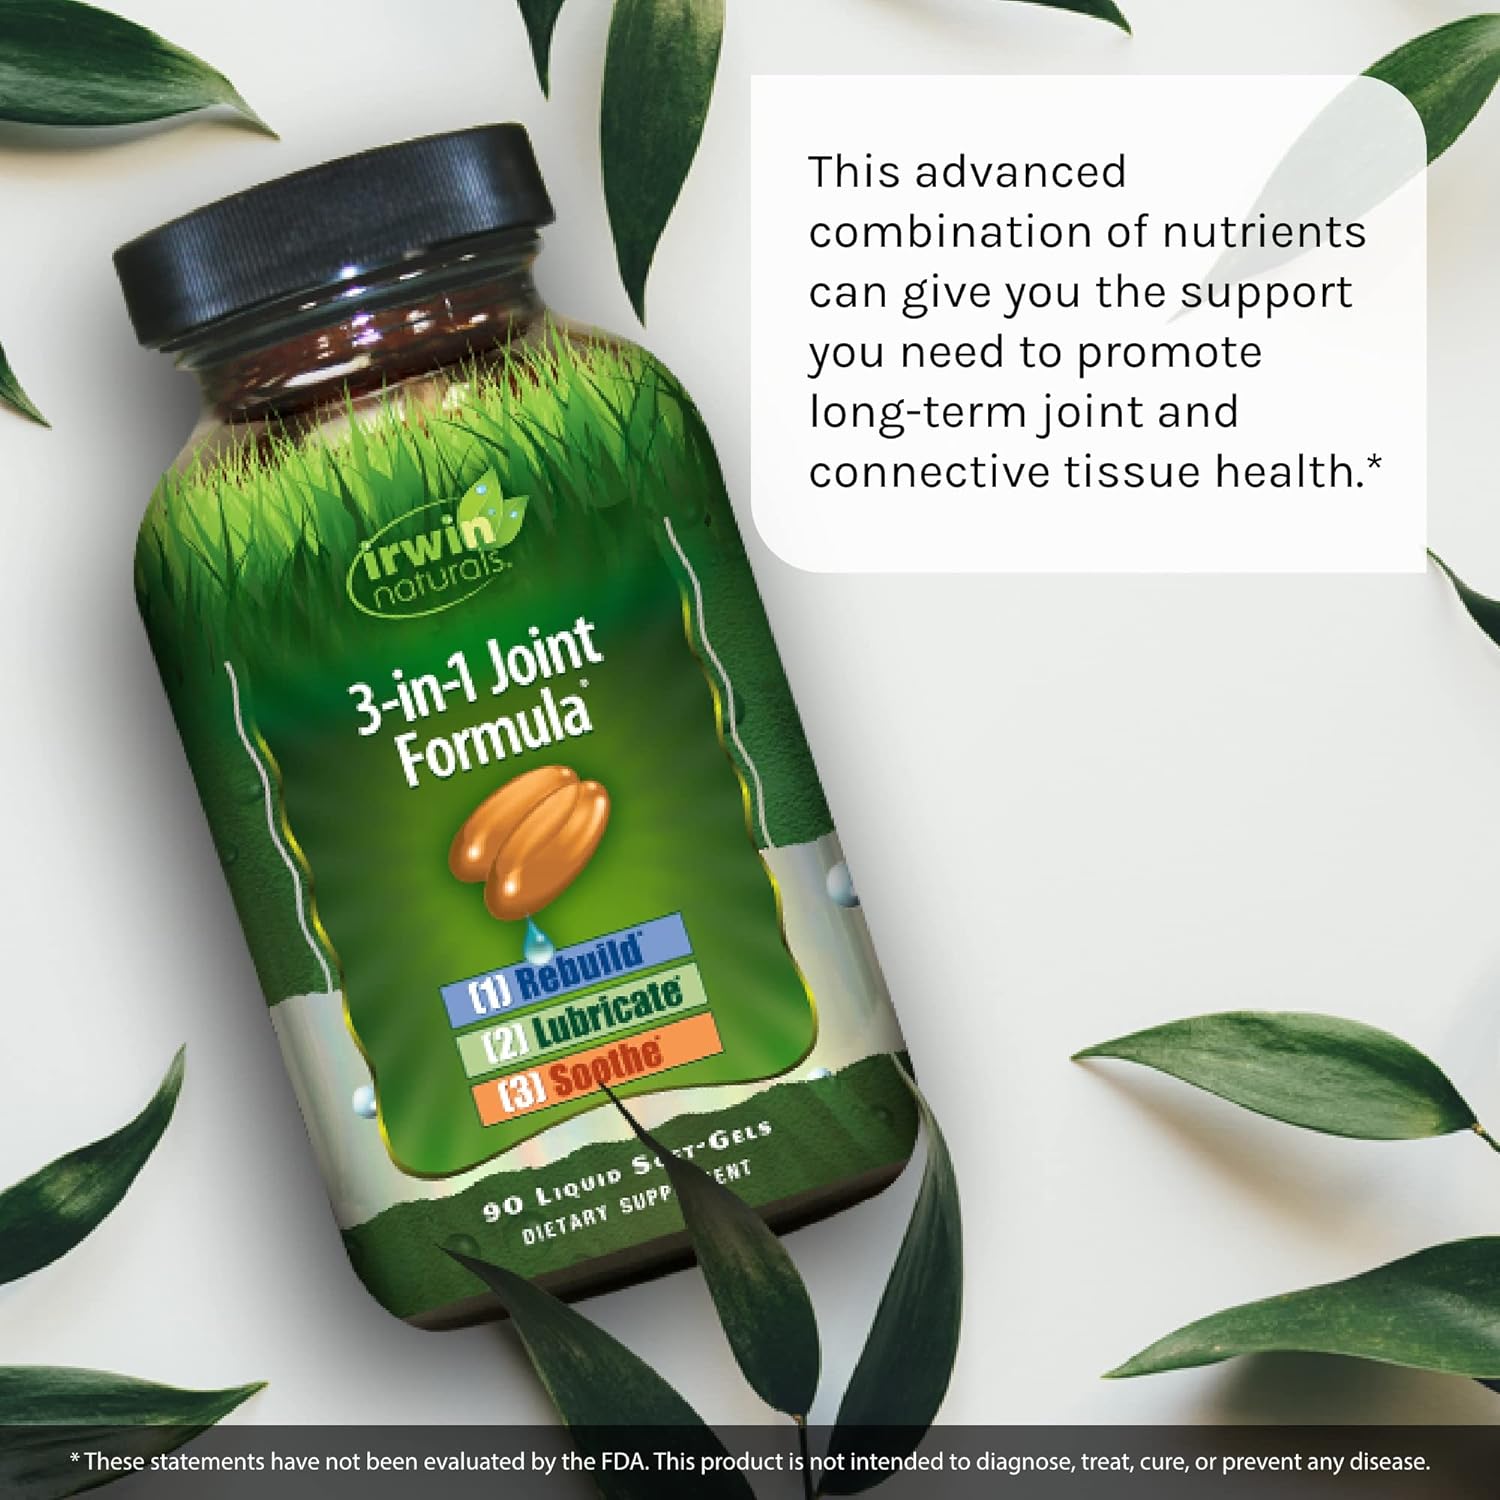 Irwin Naturals 3-in-1 Joint Formula - Powerful Joint Support Supplement with Glucosamine, Chondroitin, Turmeric & Boswellia - 90 Liquid Softgels : Health & Household